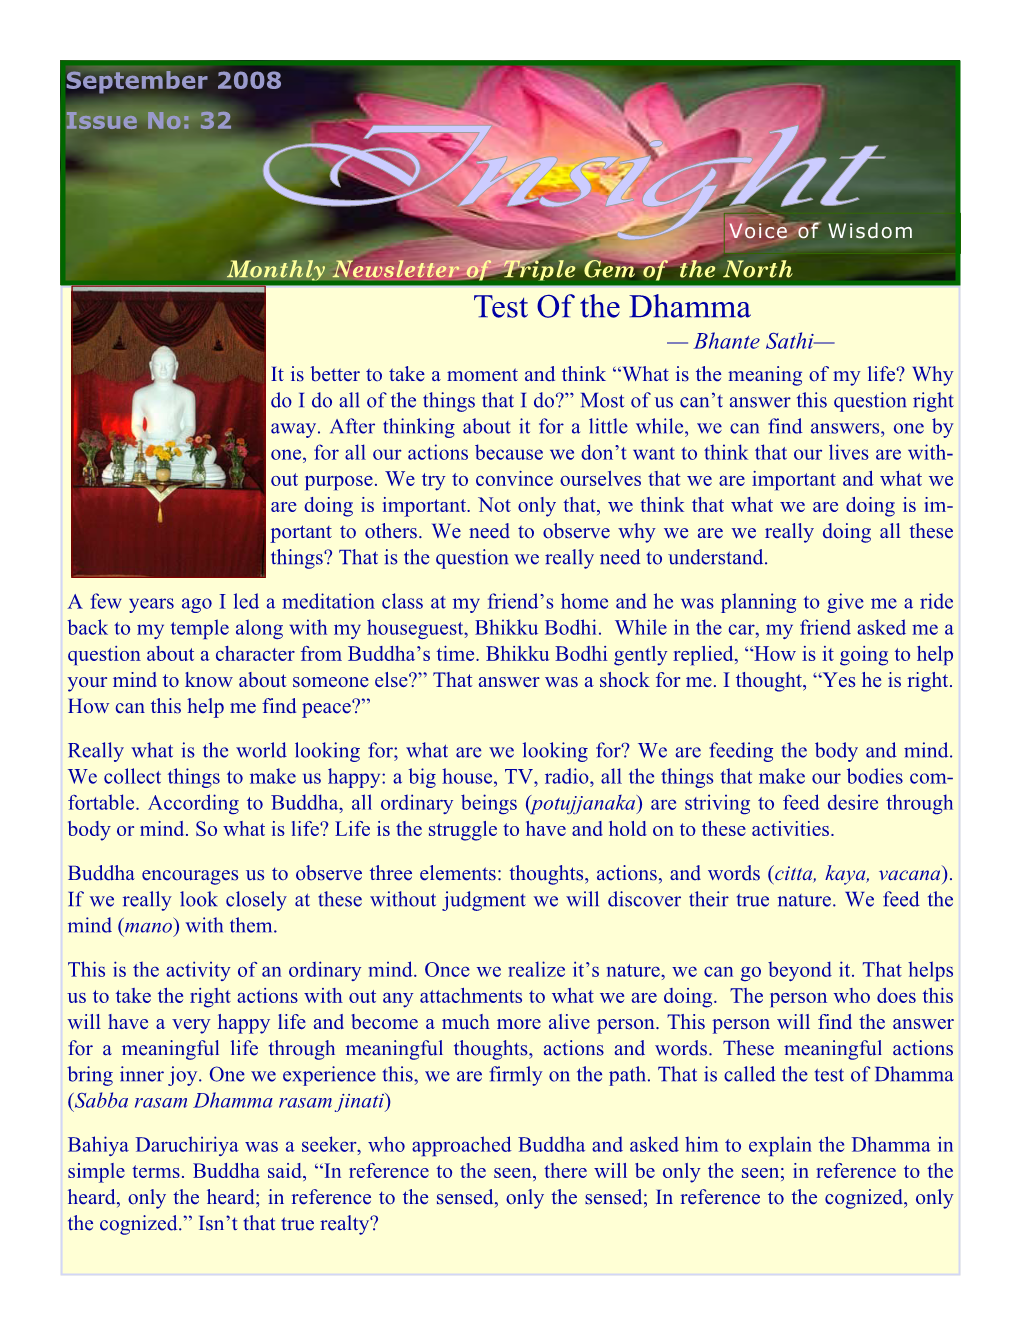 Test of the Dhamma